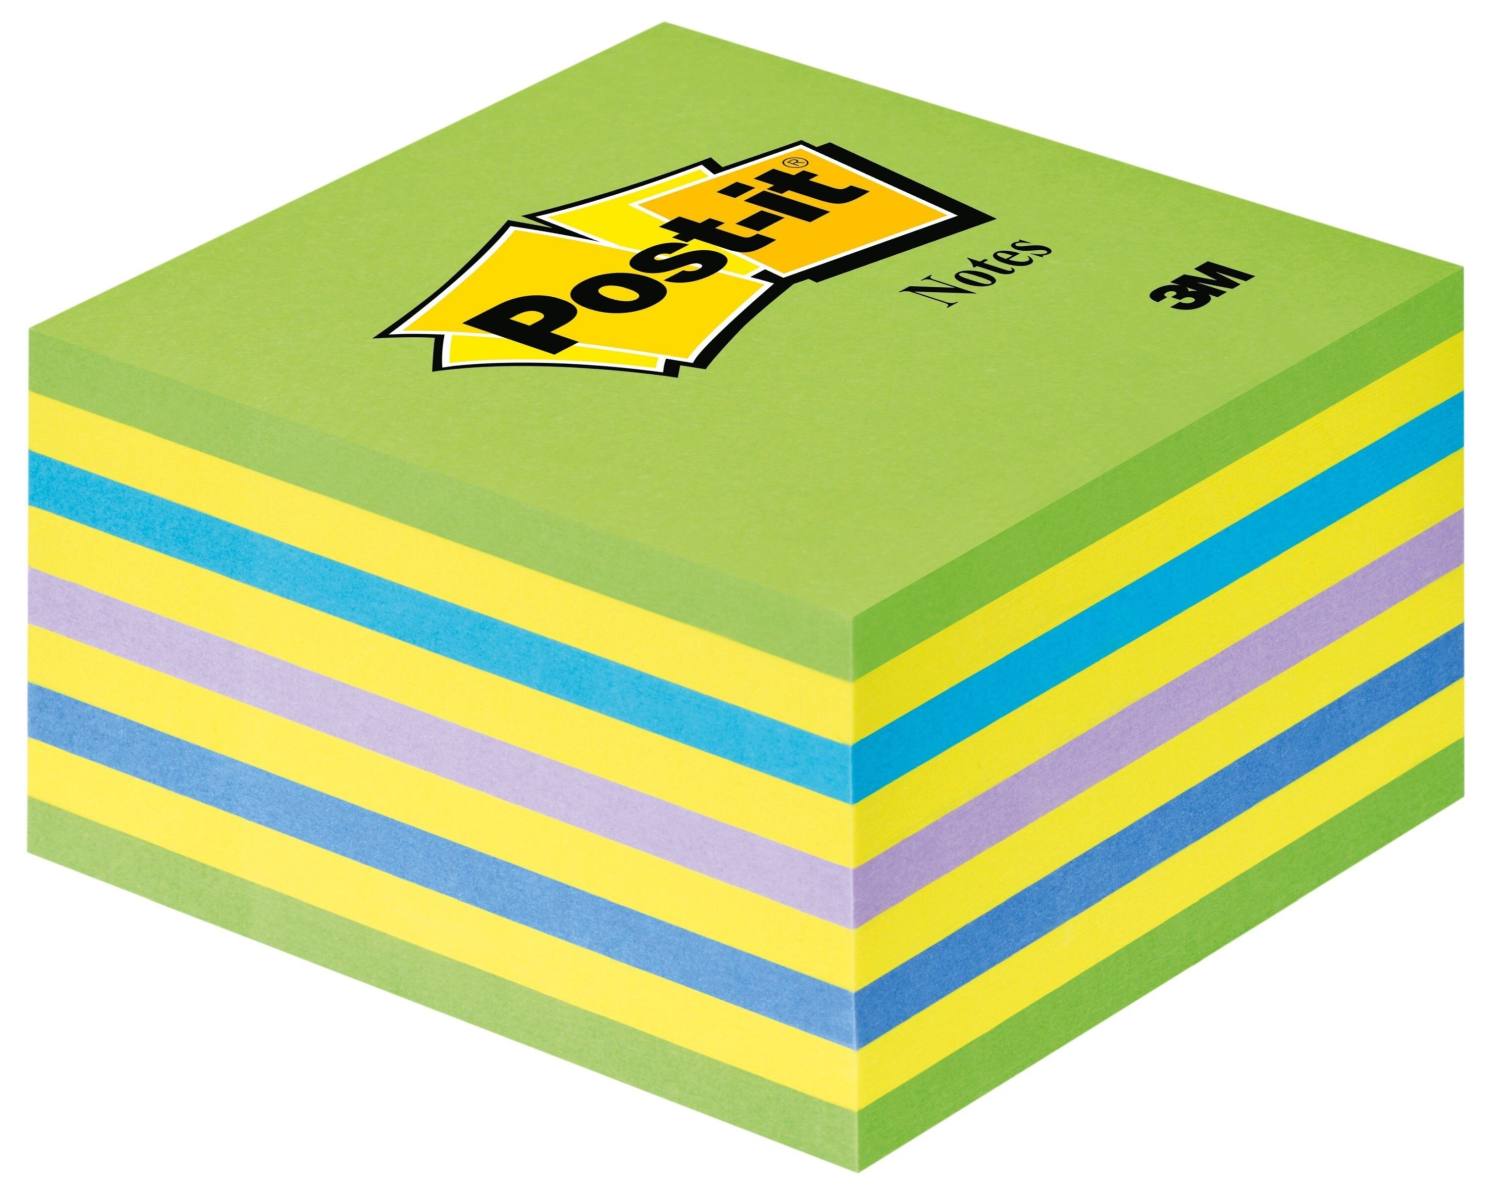 3M Post-it Cube 2028NB, 76 mm x 76 mm, yellow, neon blue, neon green, 1 cube of 450 sheets